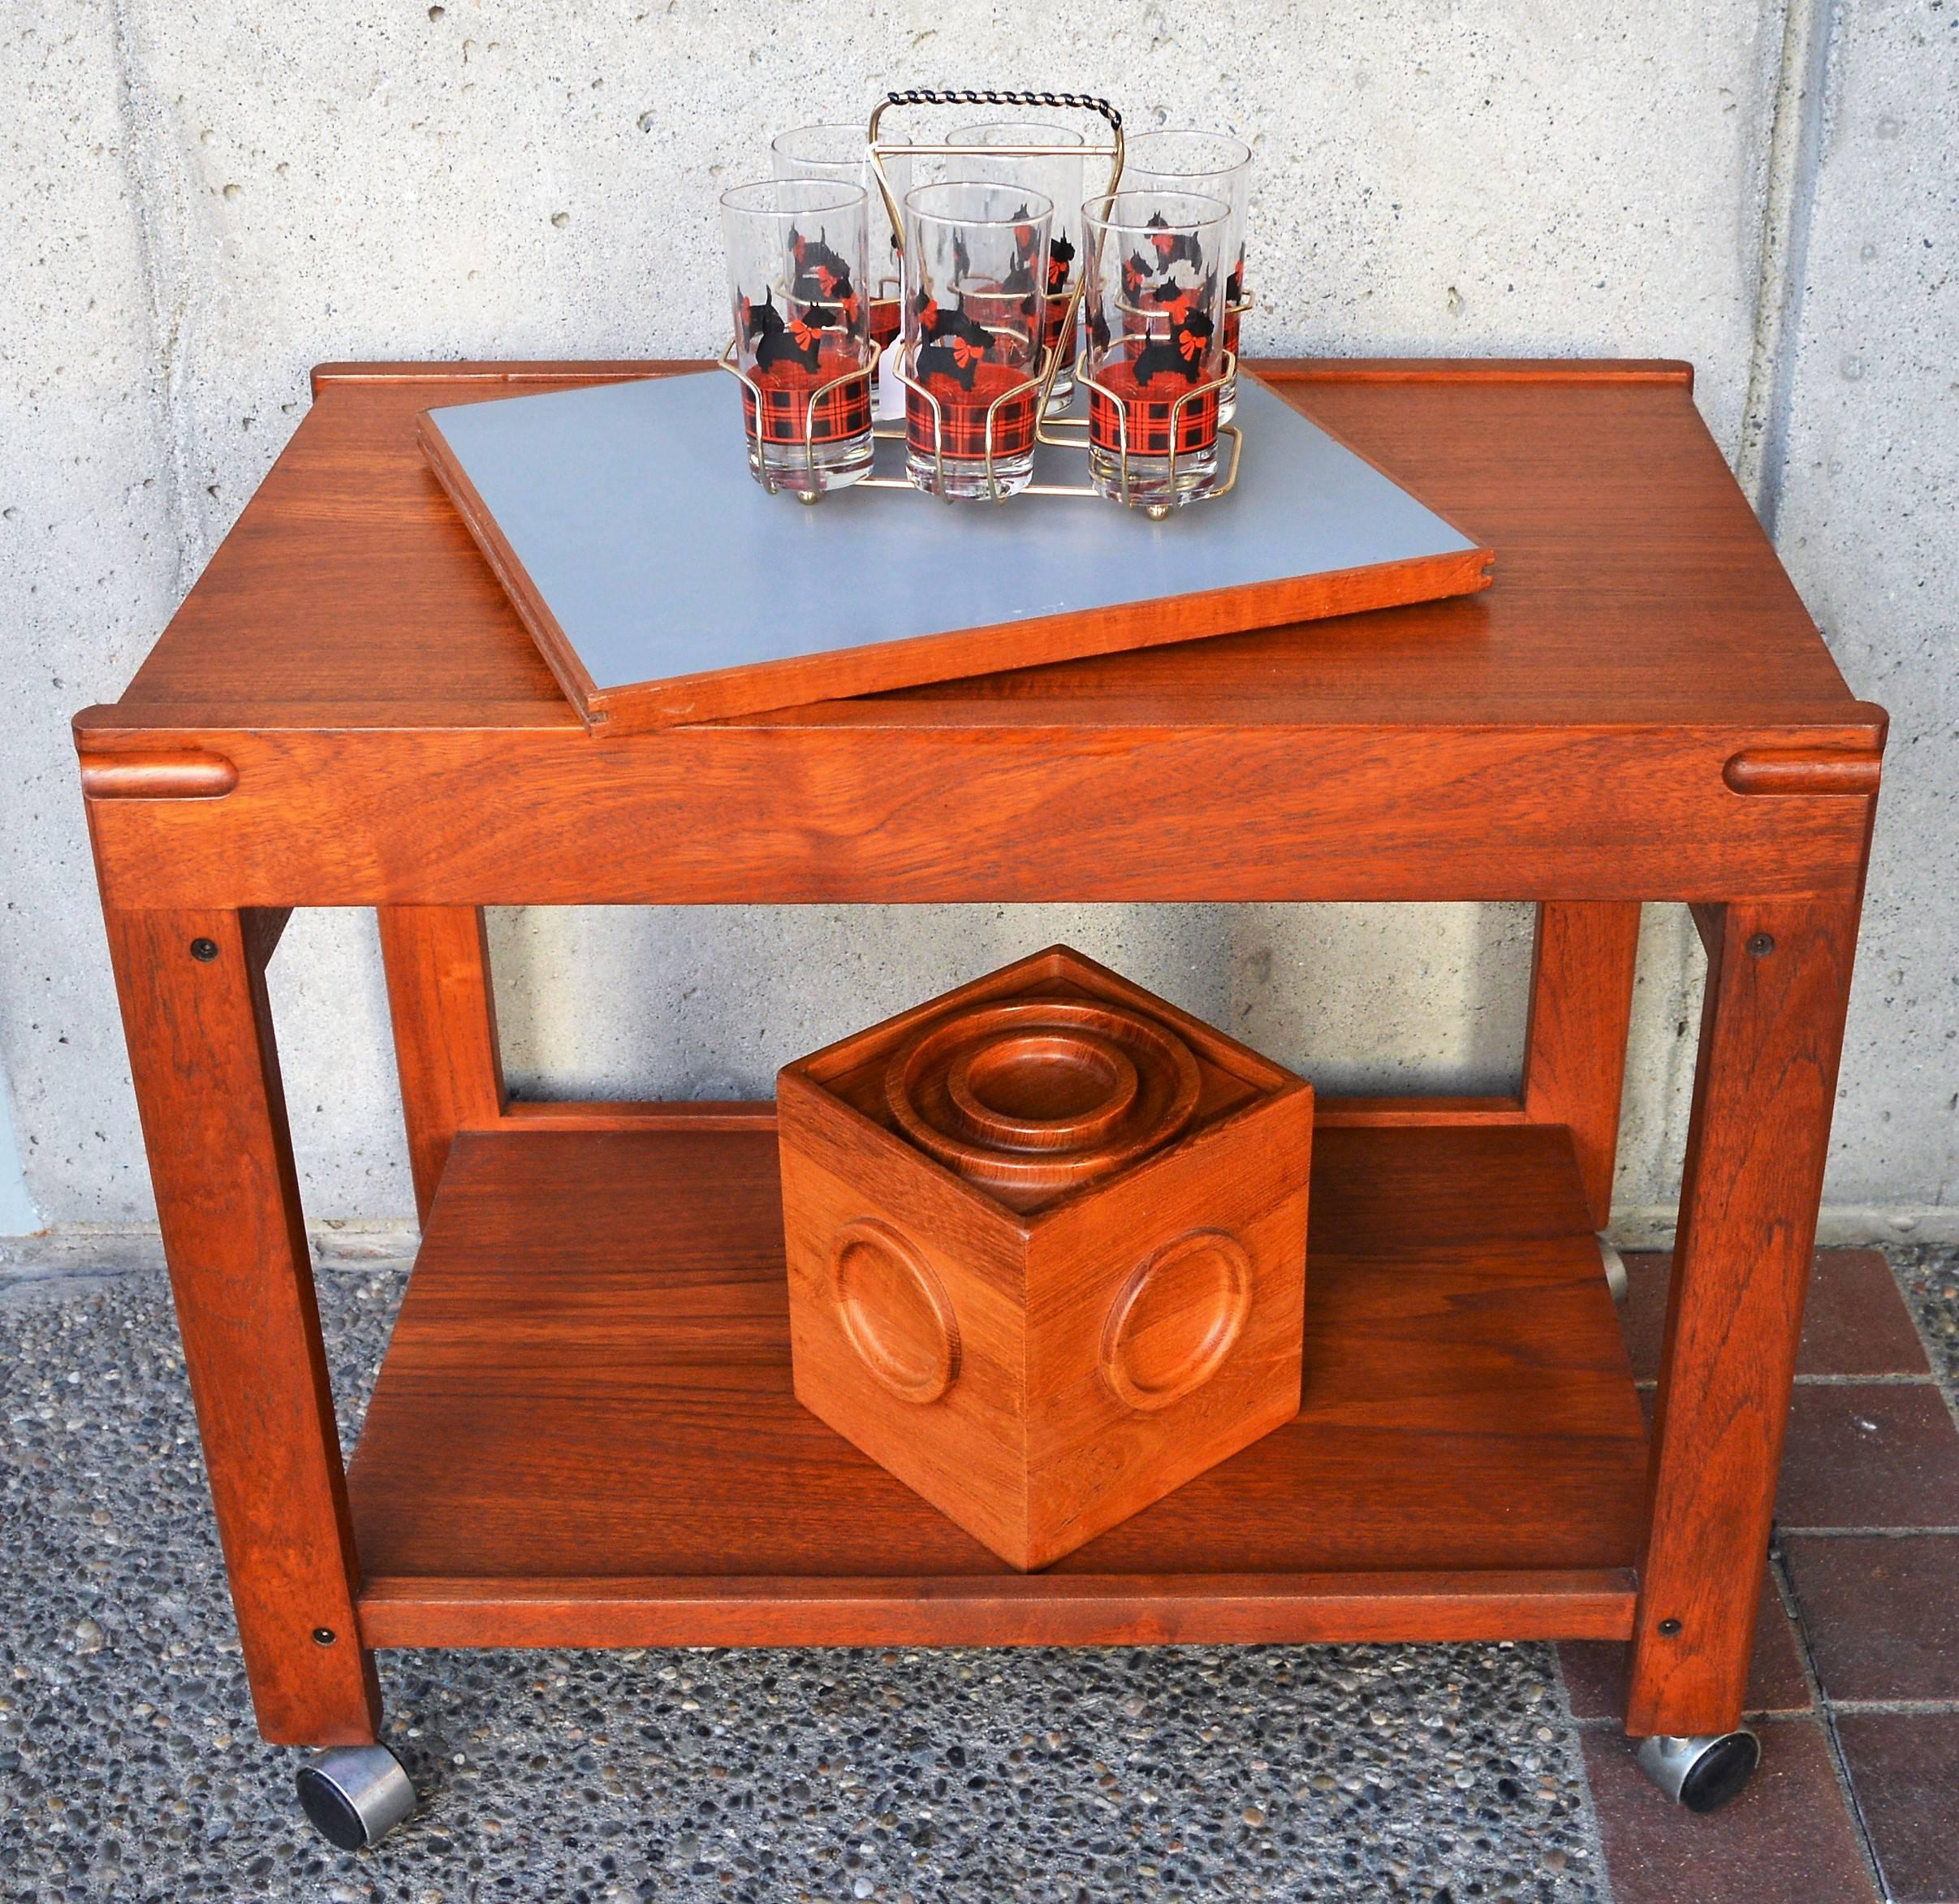 This lovely Danish modern teak bar cart or serving table was designed by Aksel Kjersgaard in the 1960s and features a top that slides over to accommodate an extension leaf that lives underneath - which is grey on one side and white on the other. On